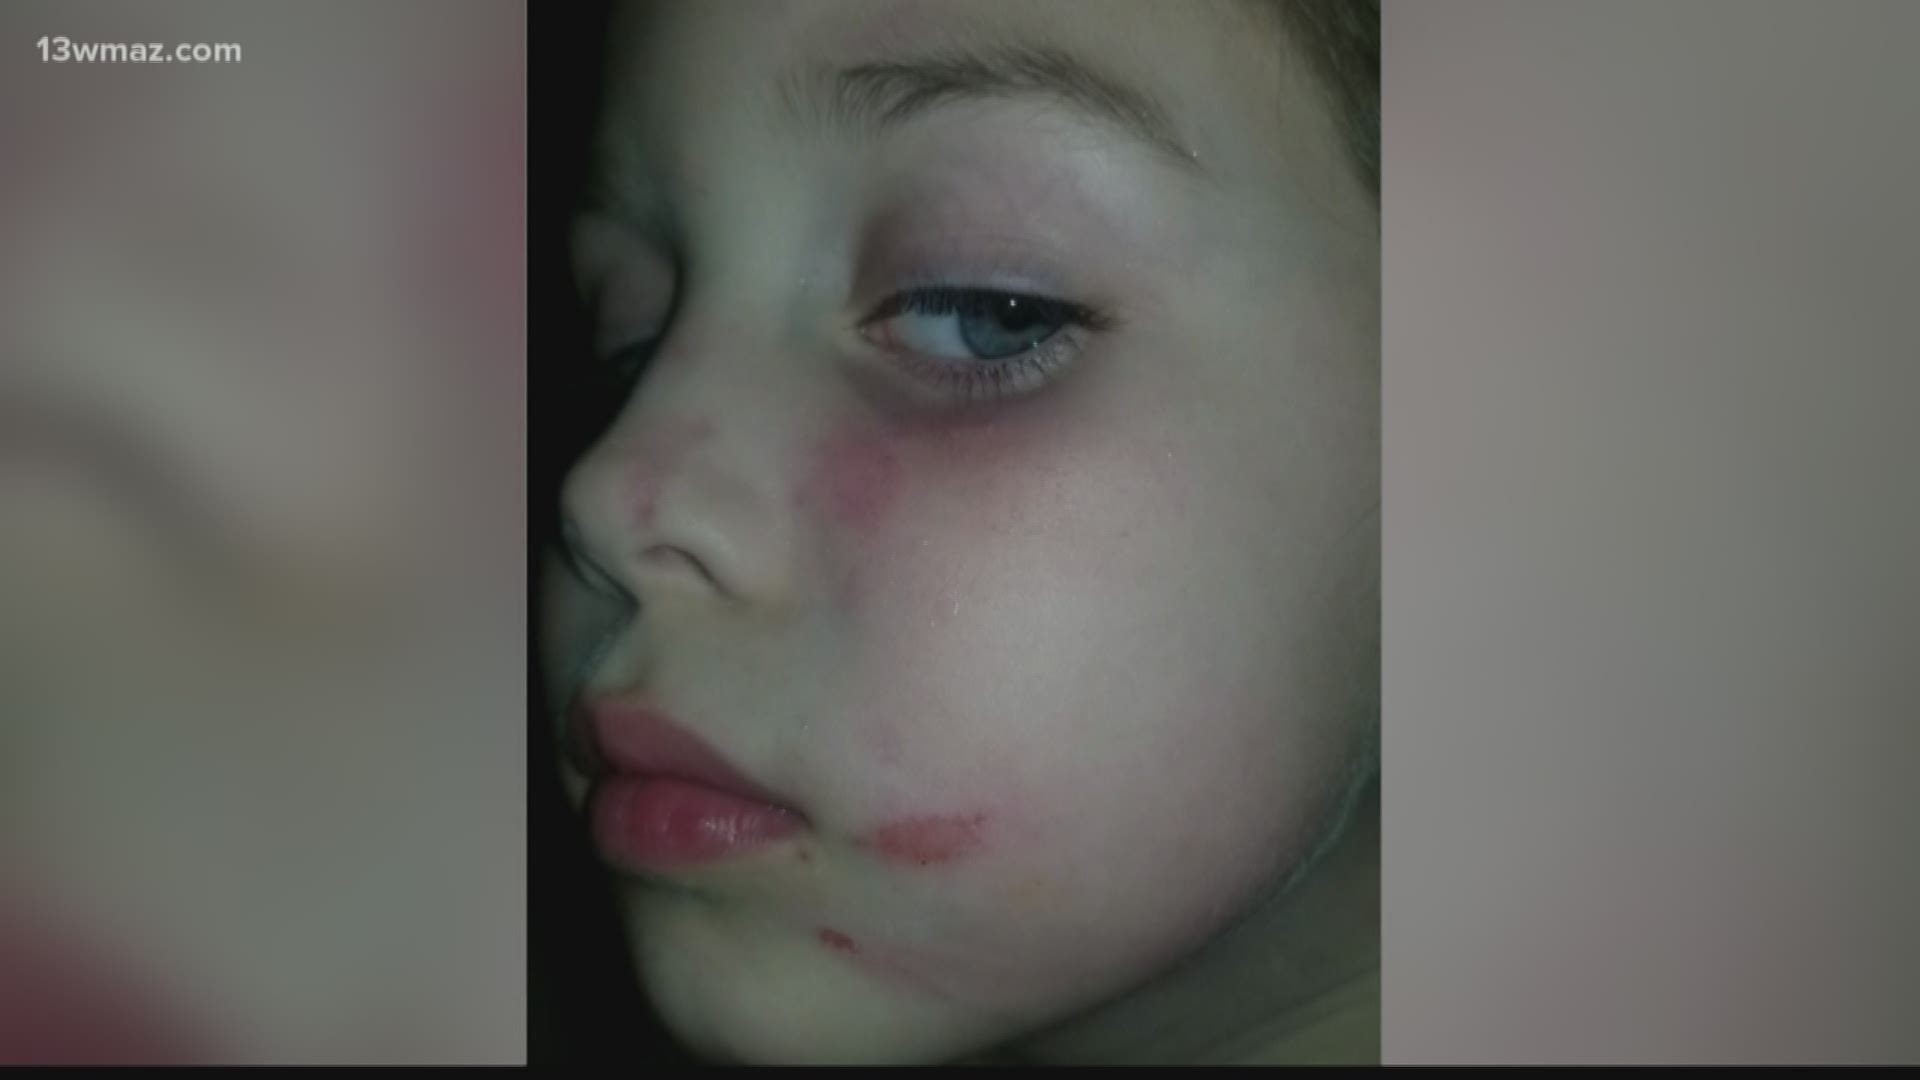 Charges are pending against a 12-year-old after they allegedly attacked a Monroe County 5-year-old on a December bus ride home